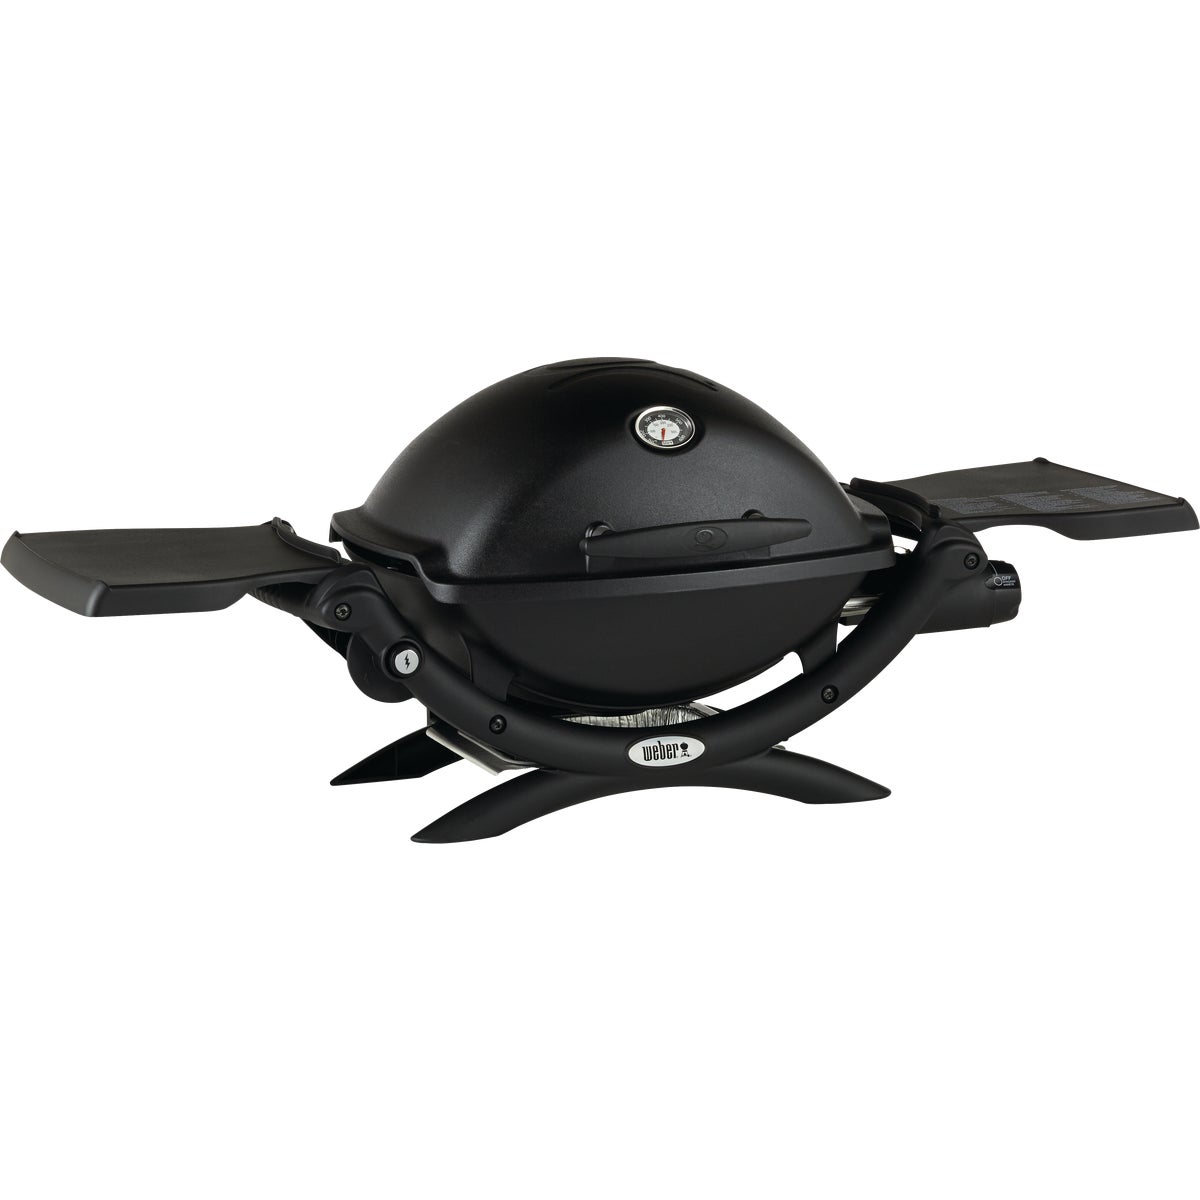 Item 801272, Portable gas grill ideal to take camping, tailgating, or to use for the 